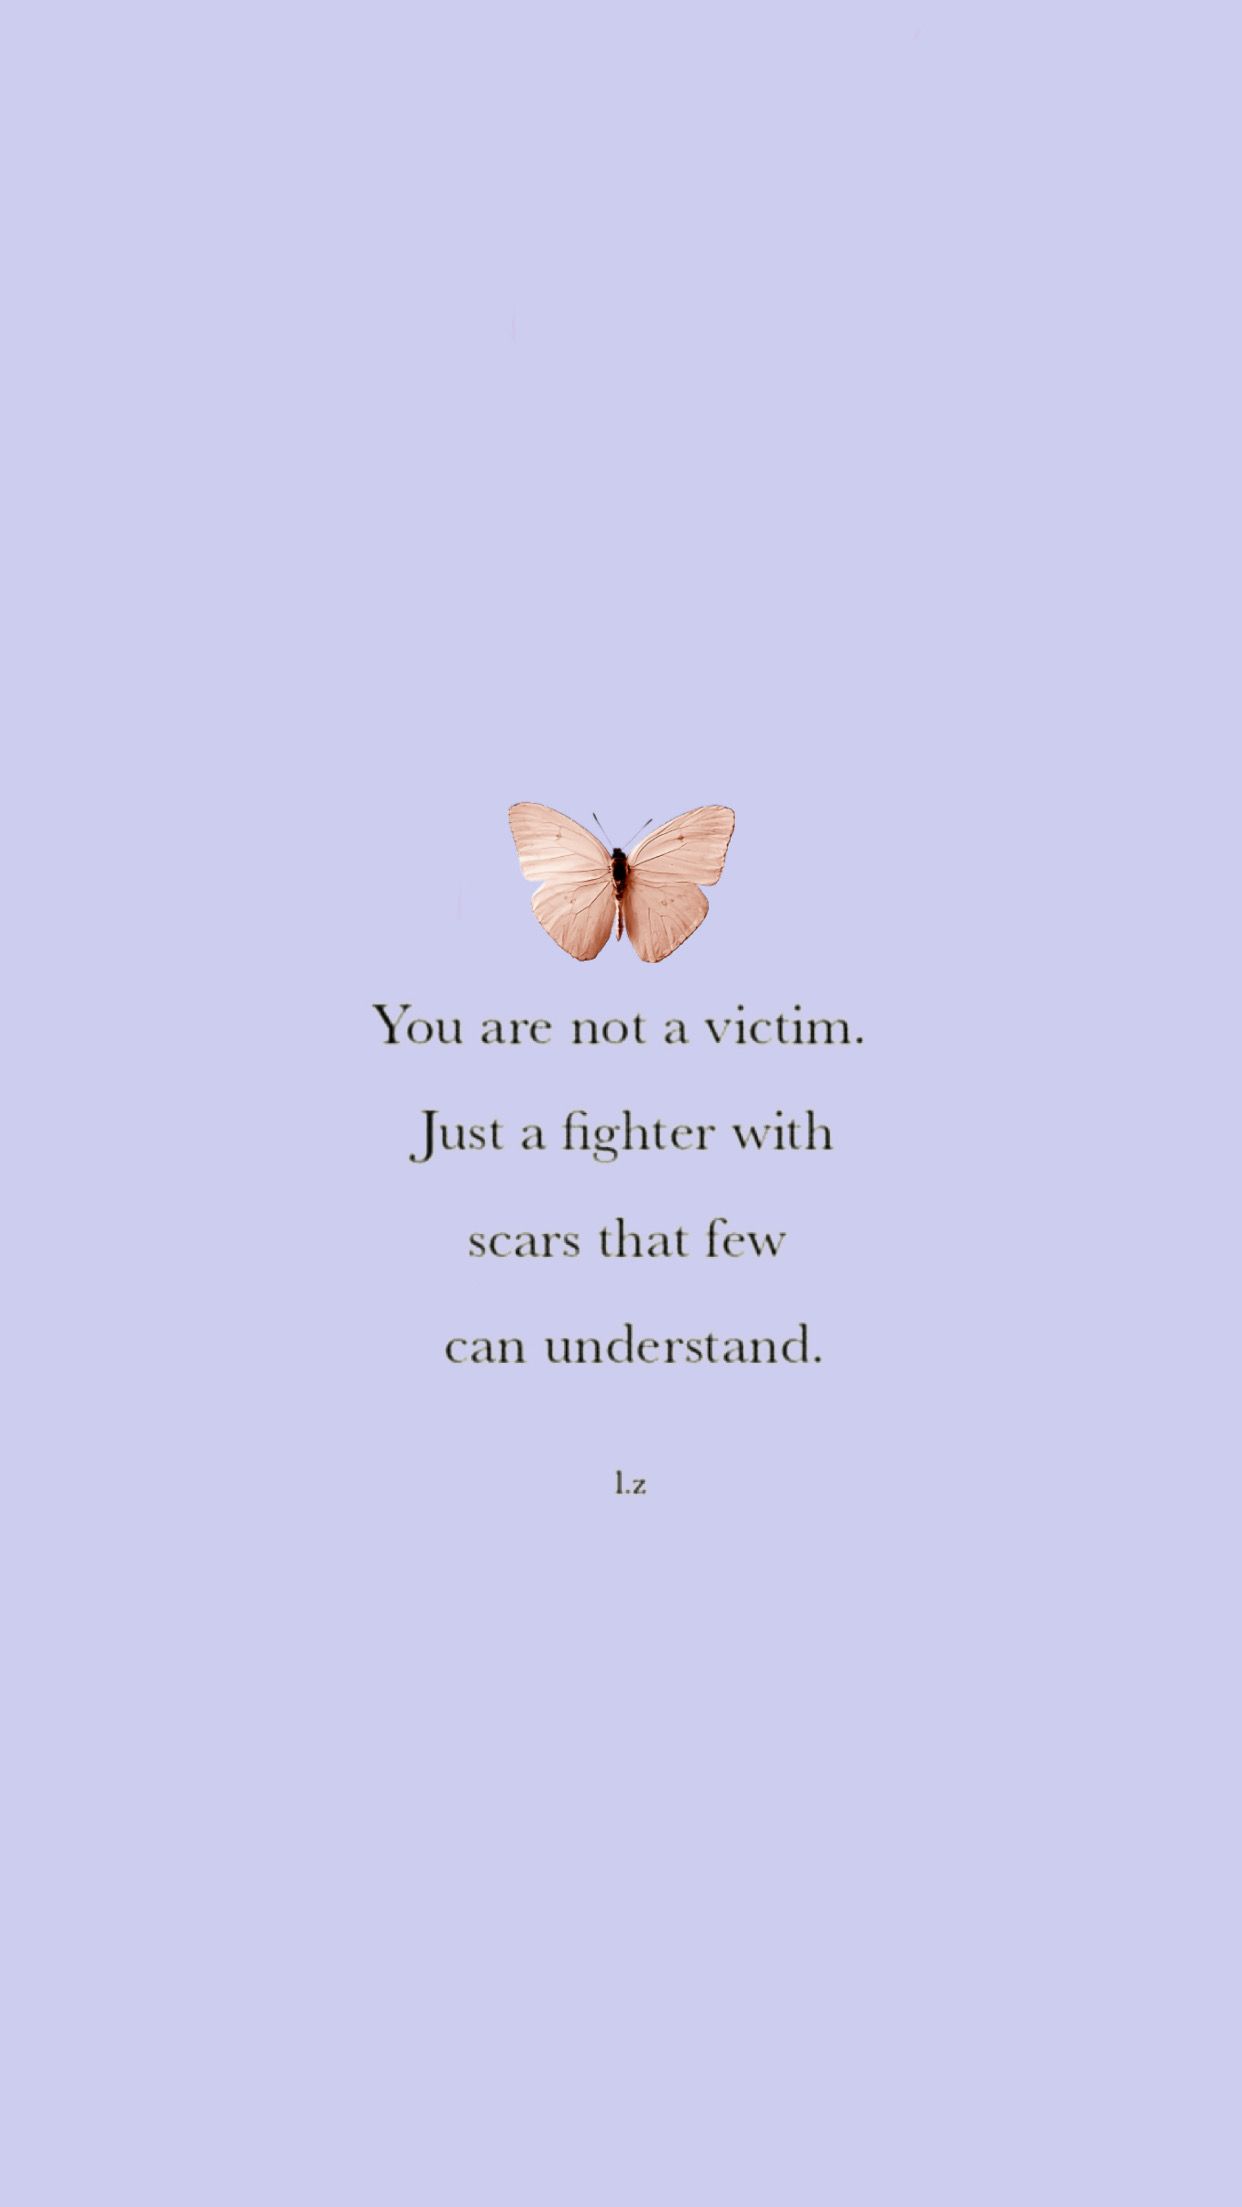 You are not a victim. Just a fighter with scars that few can understand. - Purple quotes